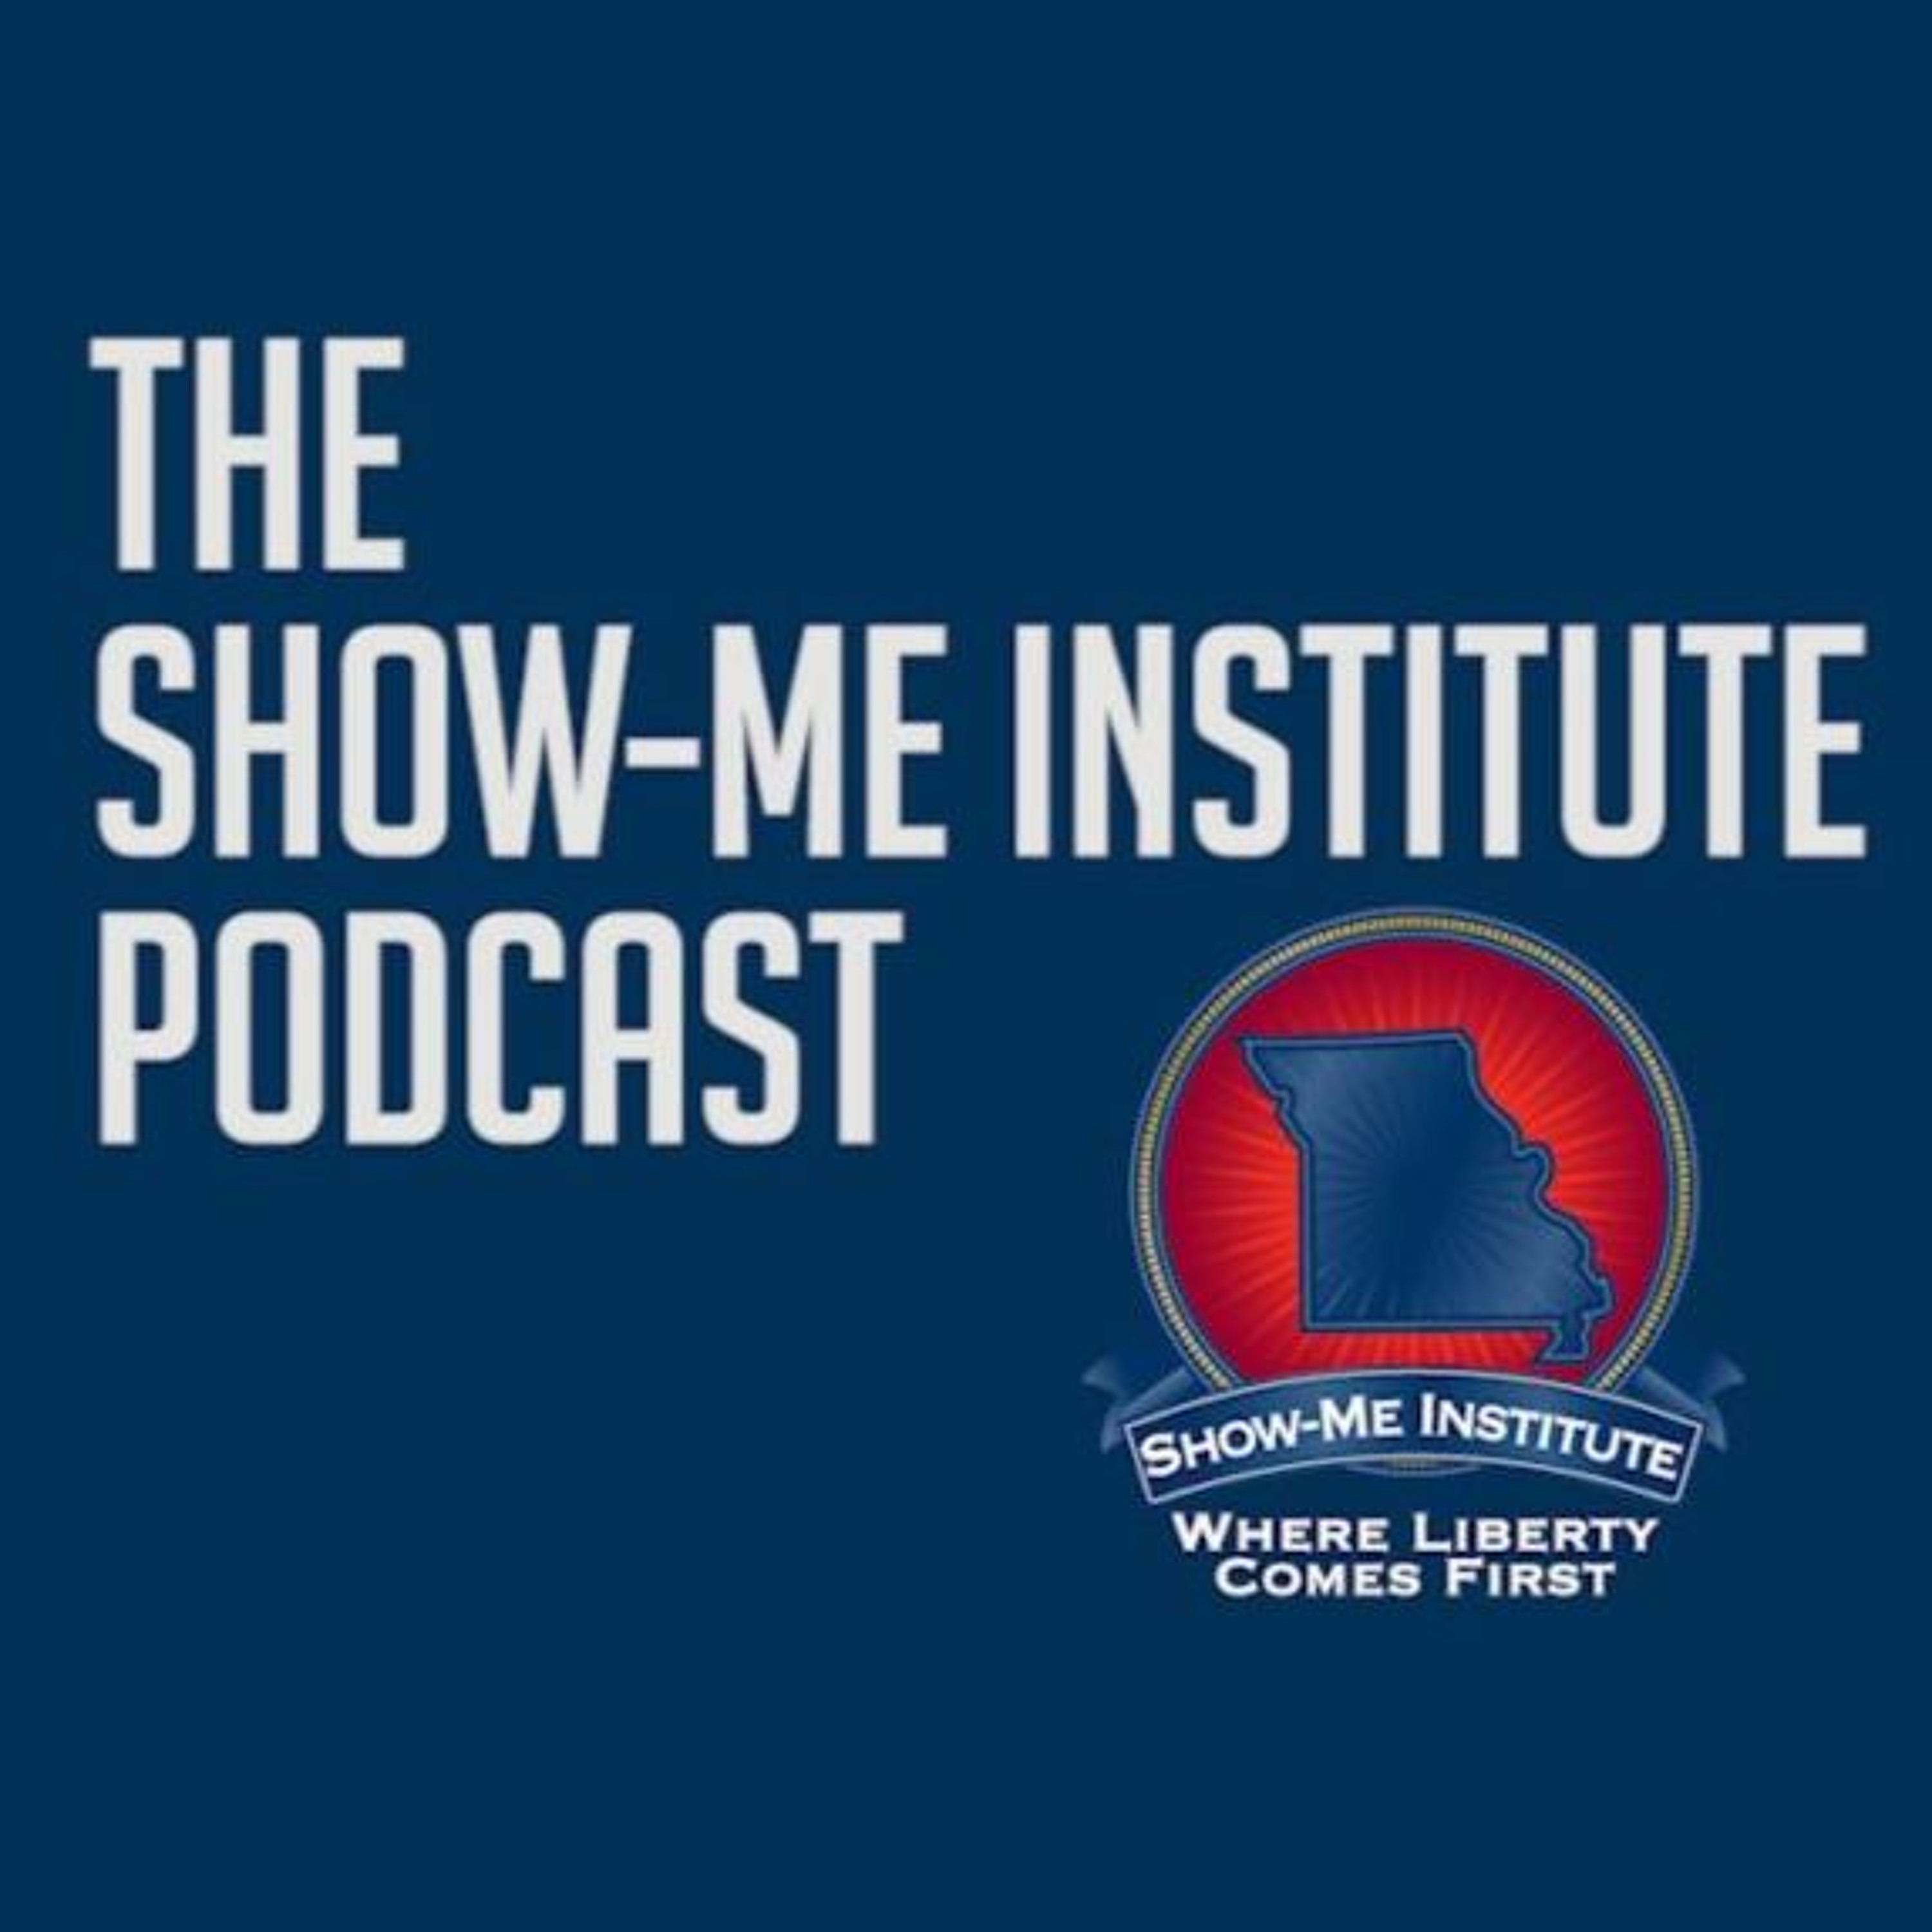 SMI Podcast: Health Care Policy is About People -  Michael Cannon